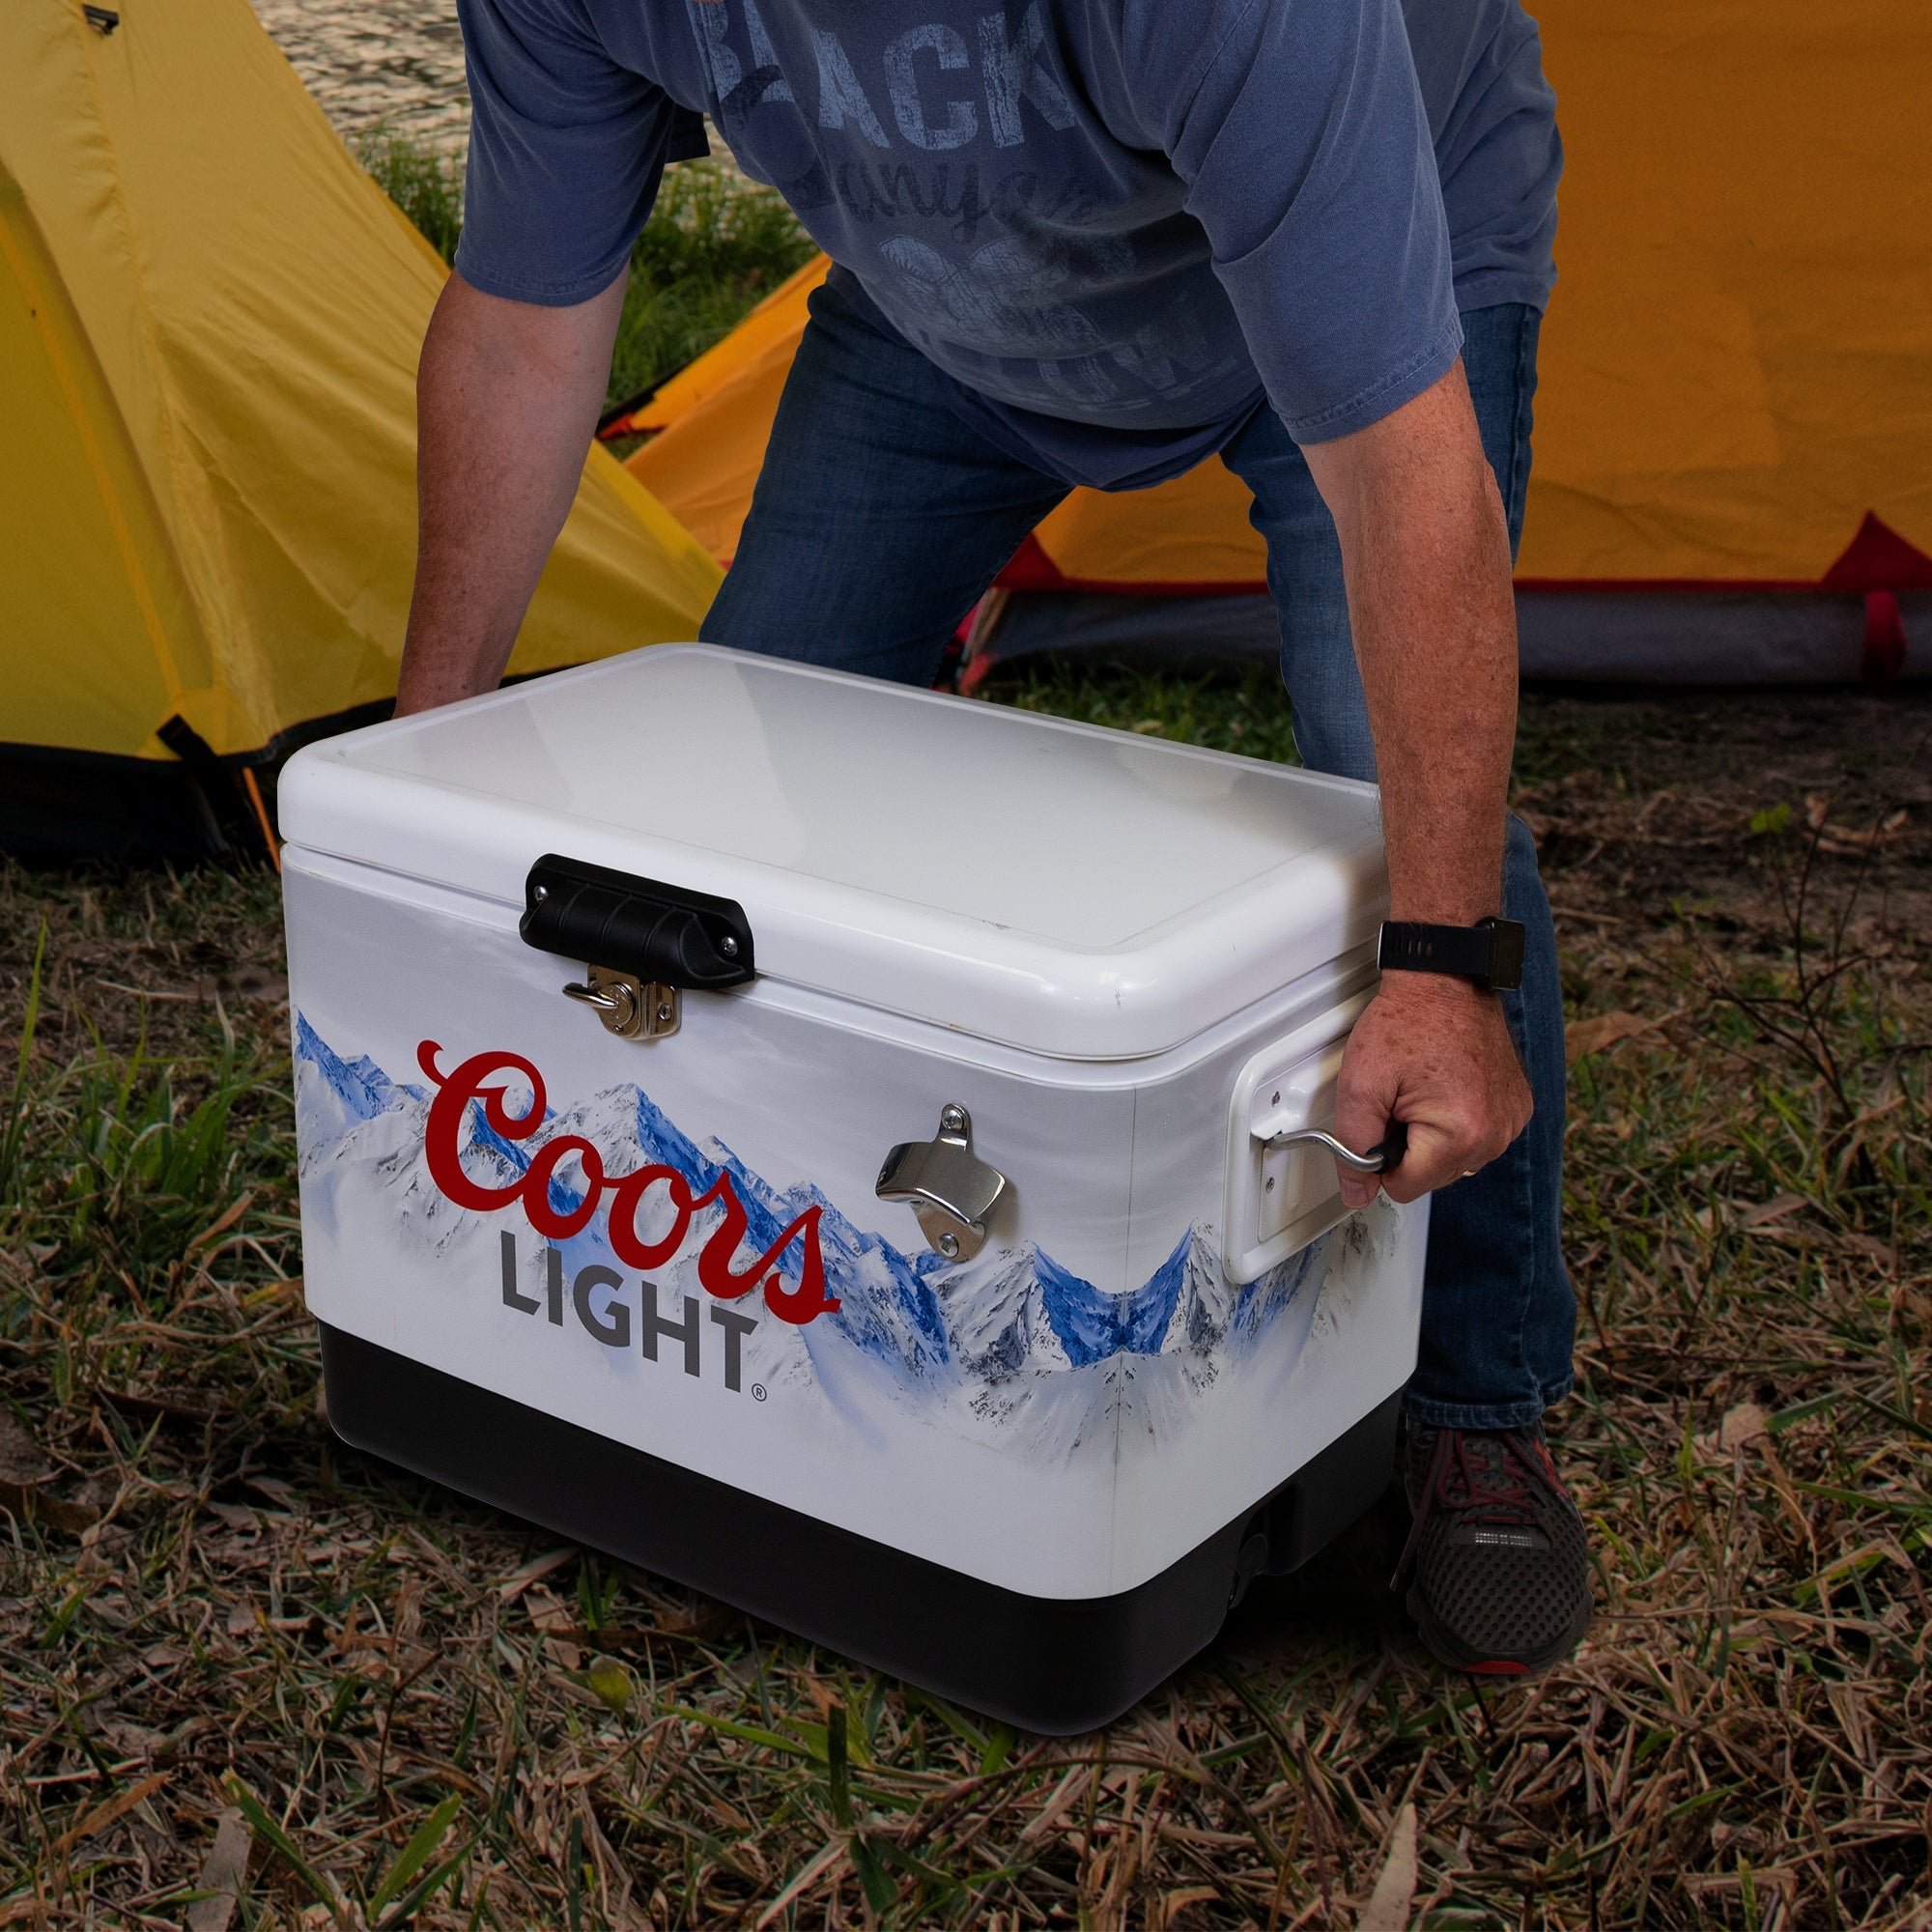  Lifestyle image of a person wearing jeans and a blue t-shirt lifting the Coors Light 54 quart ice chest with two yellow dome tents visible in the background